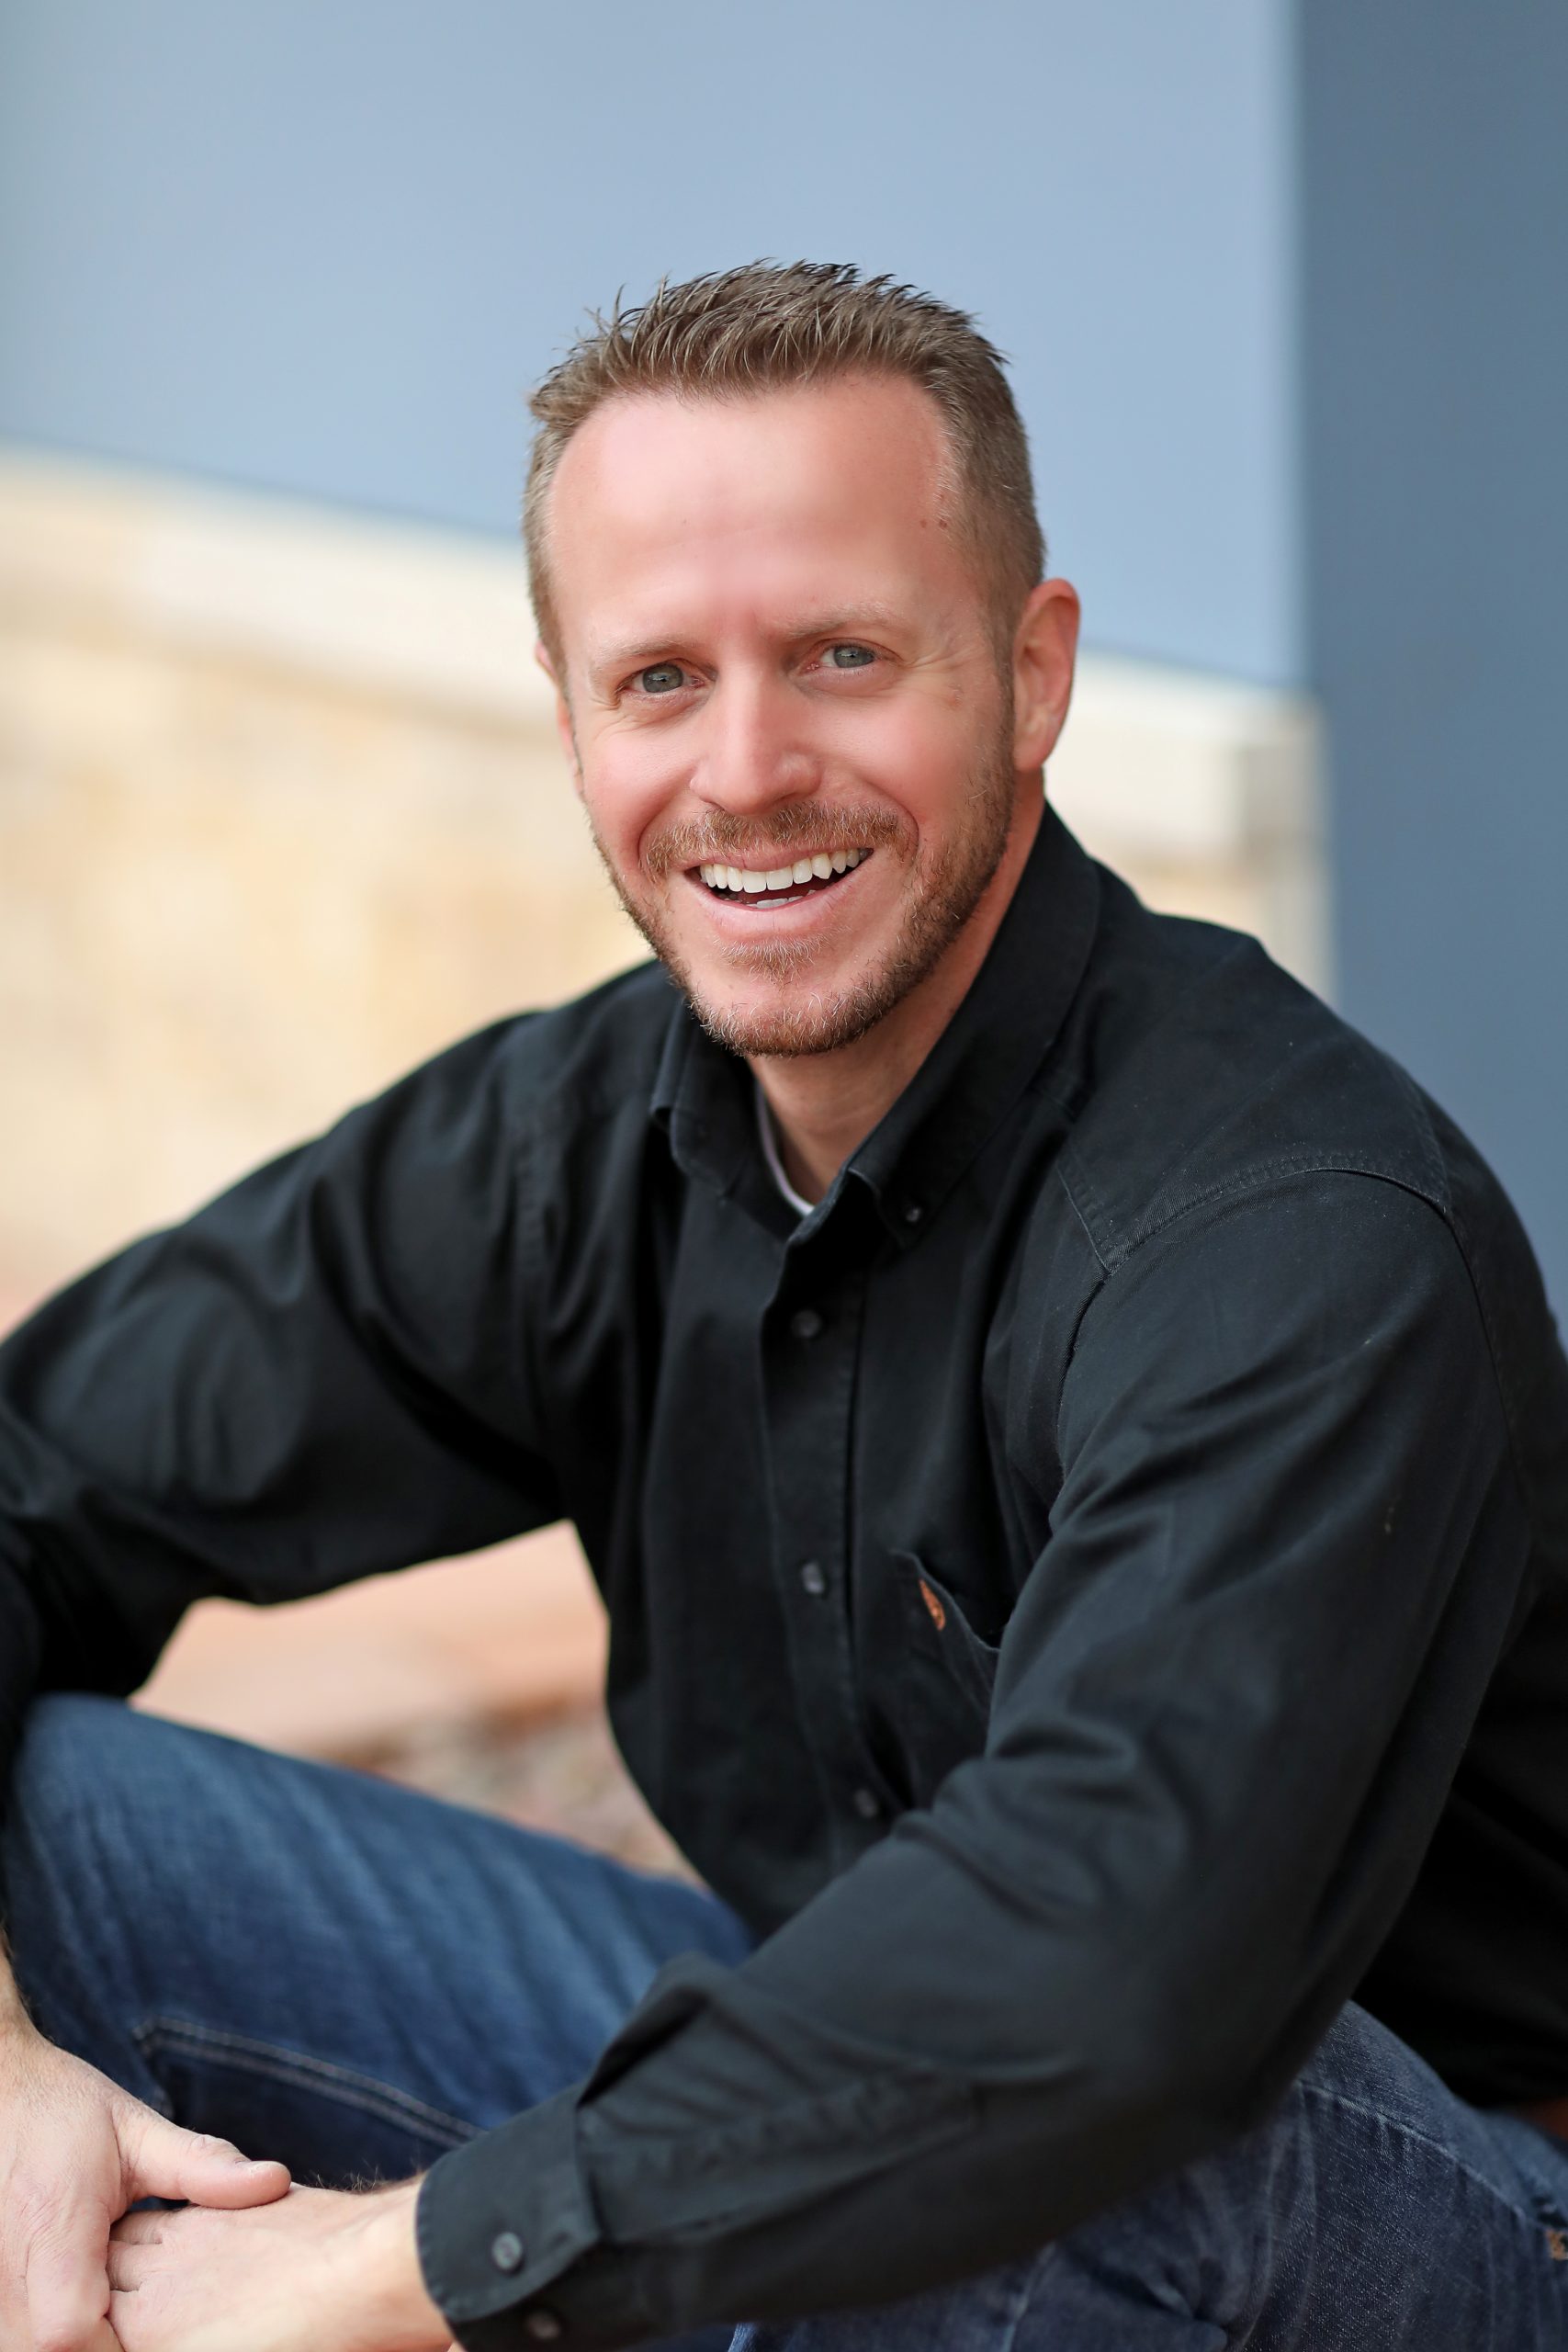 Sun City West cosmetic dentist, Dr. Mathew Harmon, sitting and smiling for a professional photo